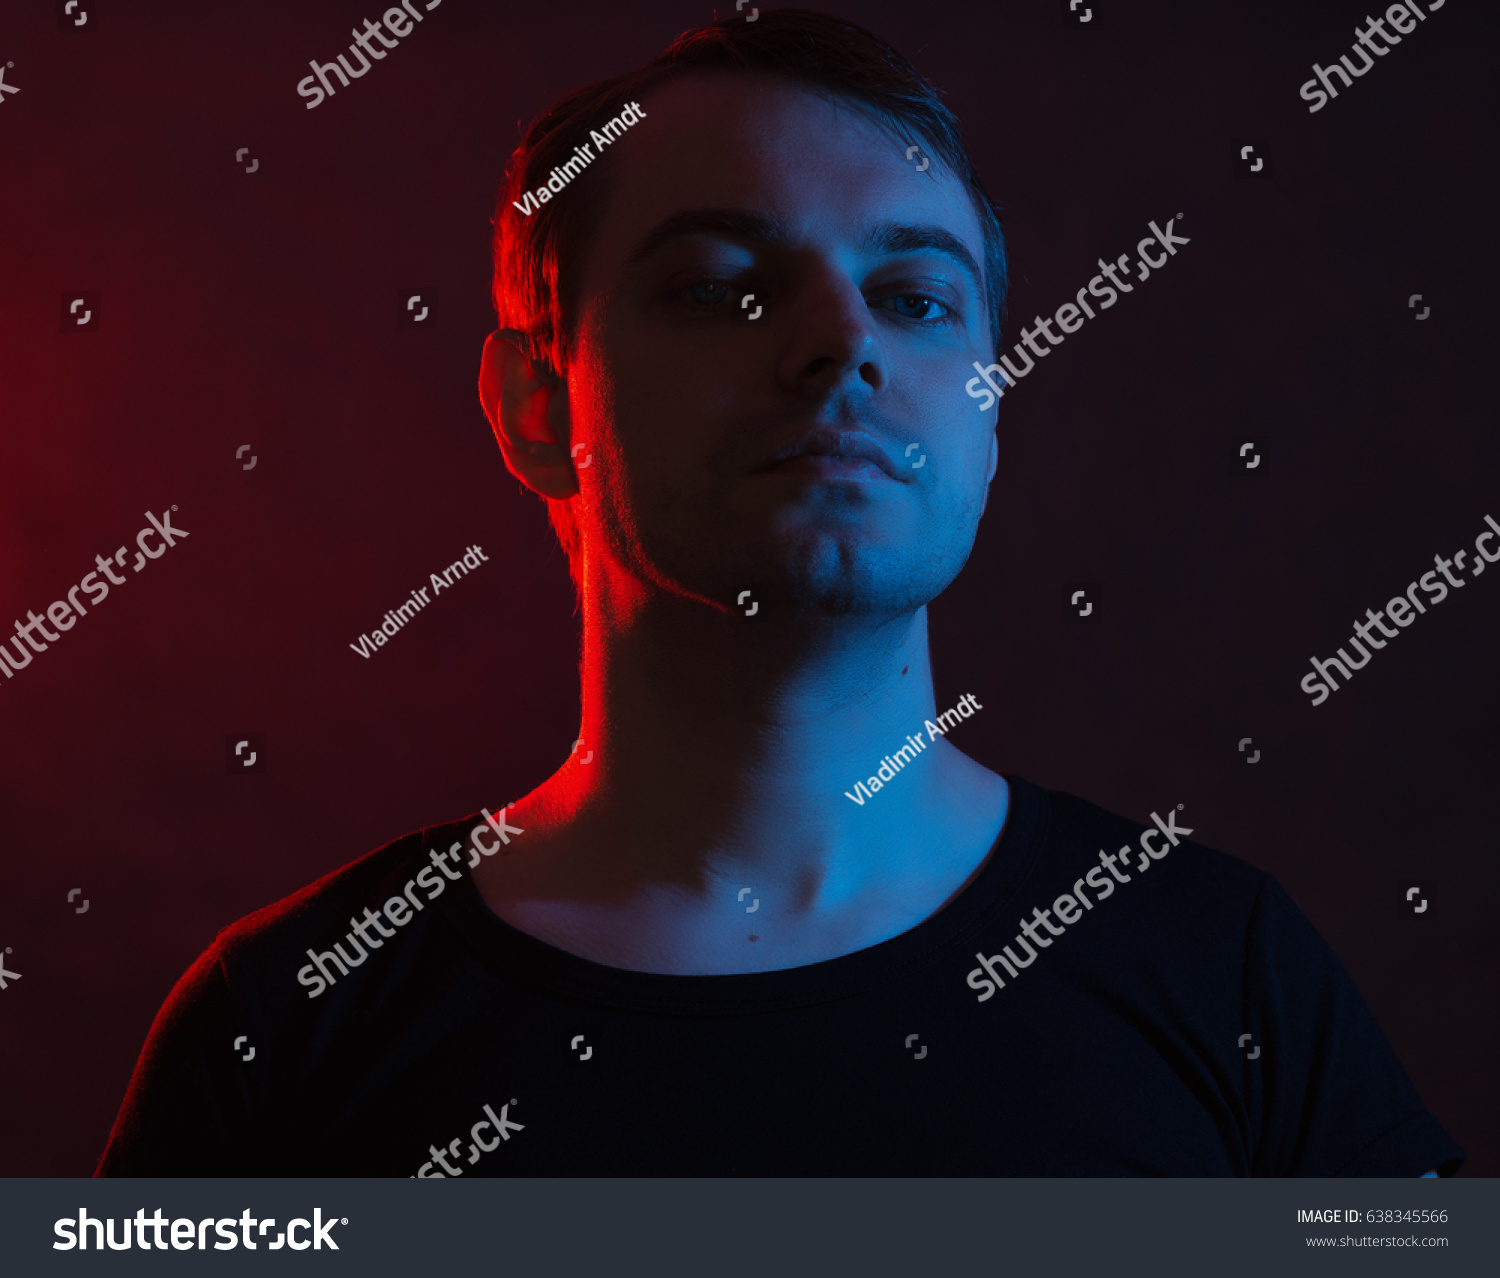 Portrait of a man with colored light and dark background. #638345566